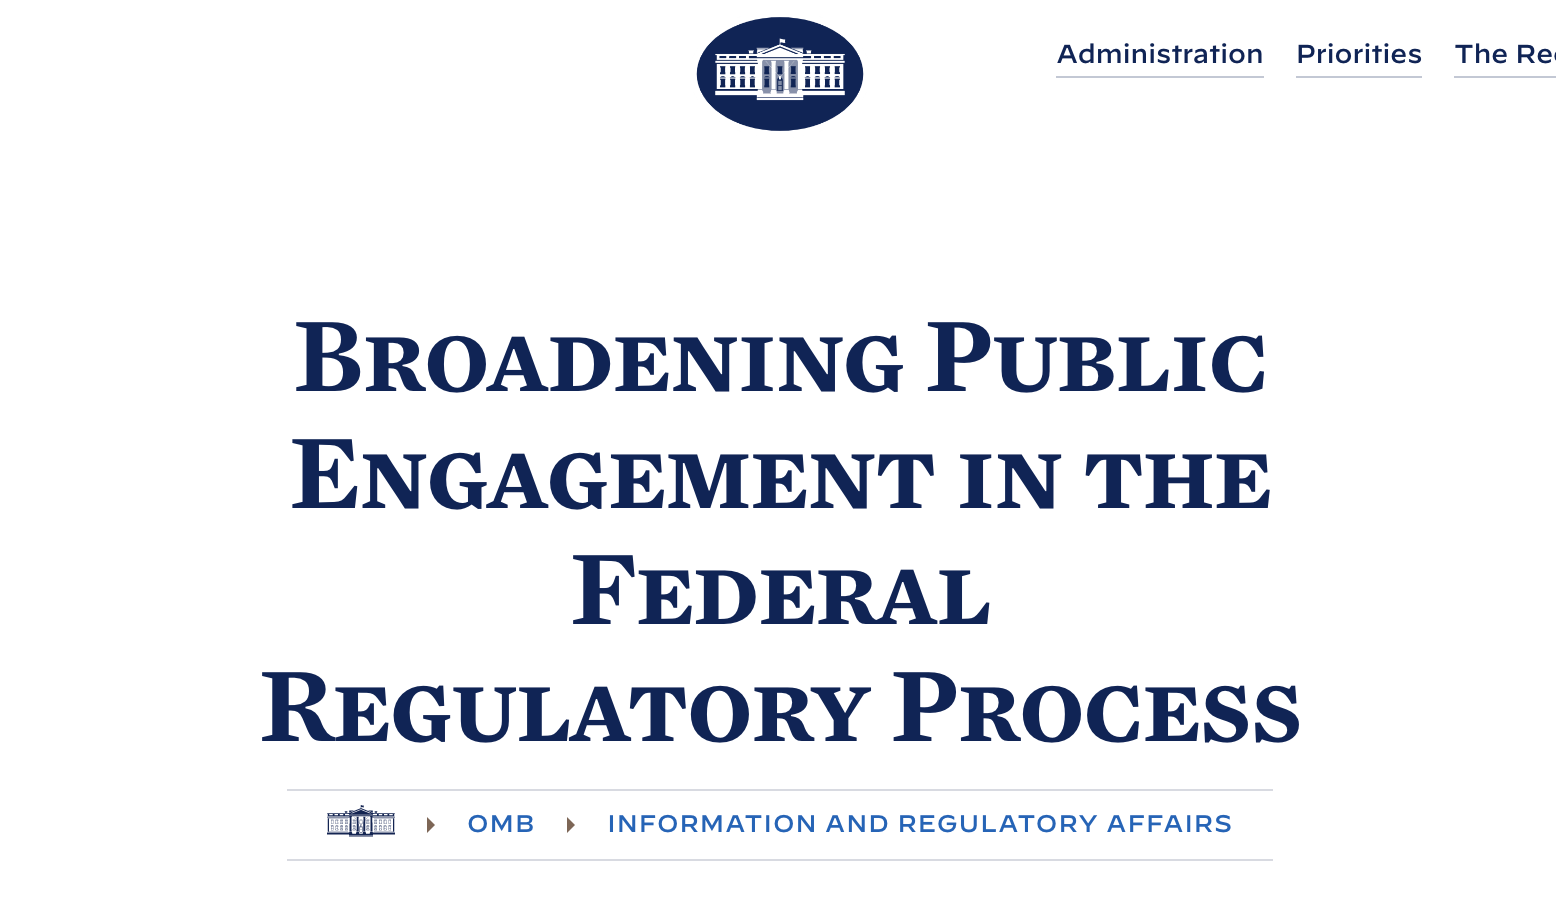 EDGI’s Public Comment on Broadening Public Engagement in the Federal Regulatory Process